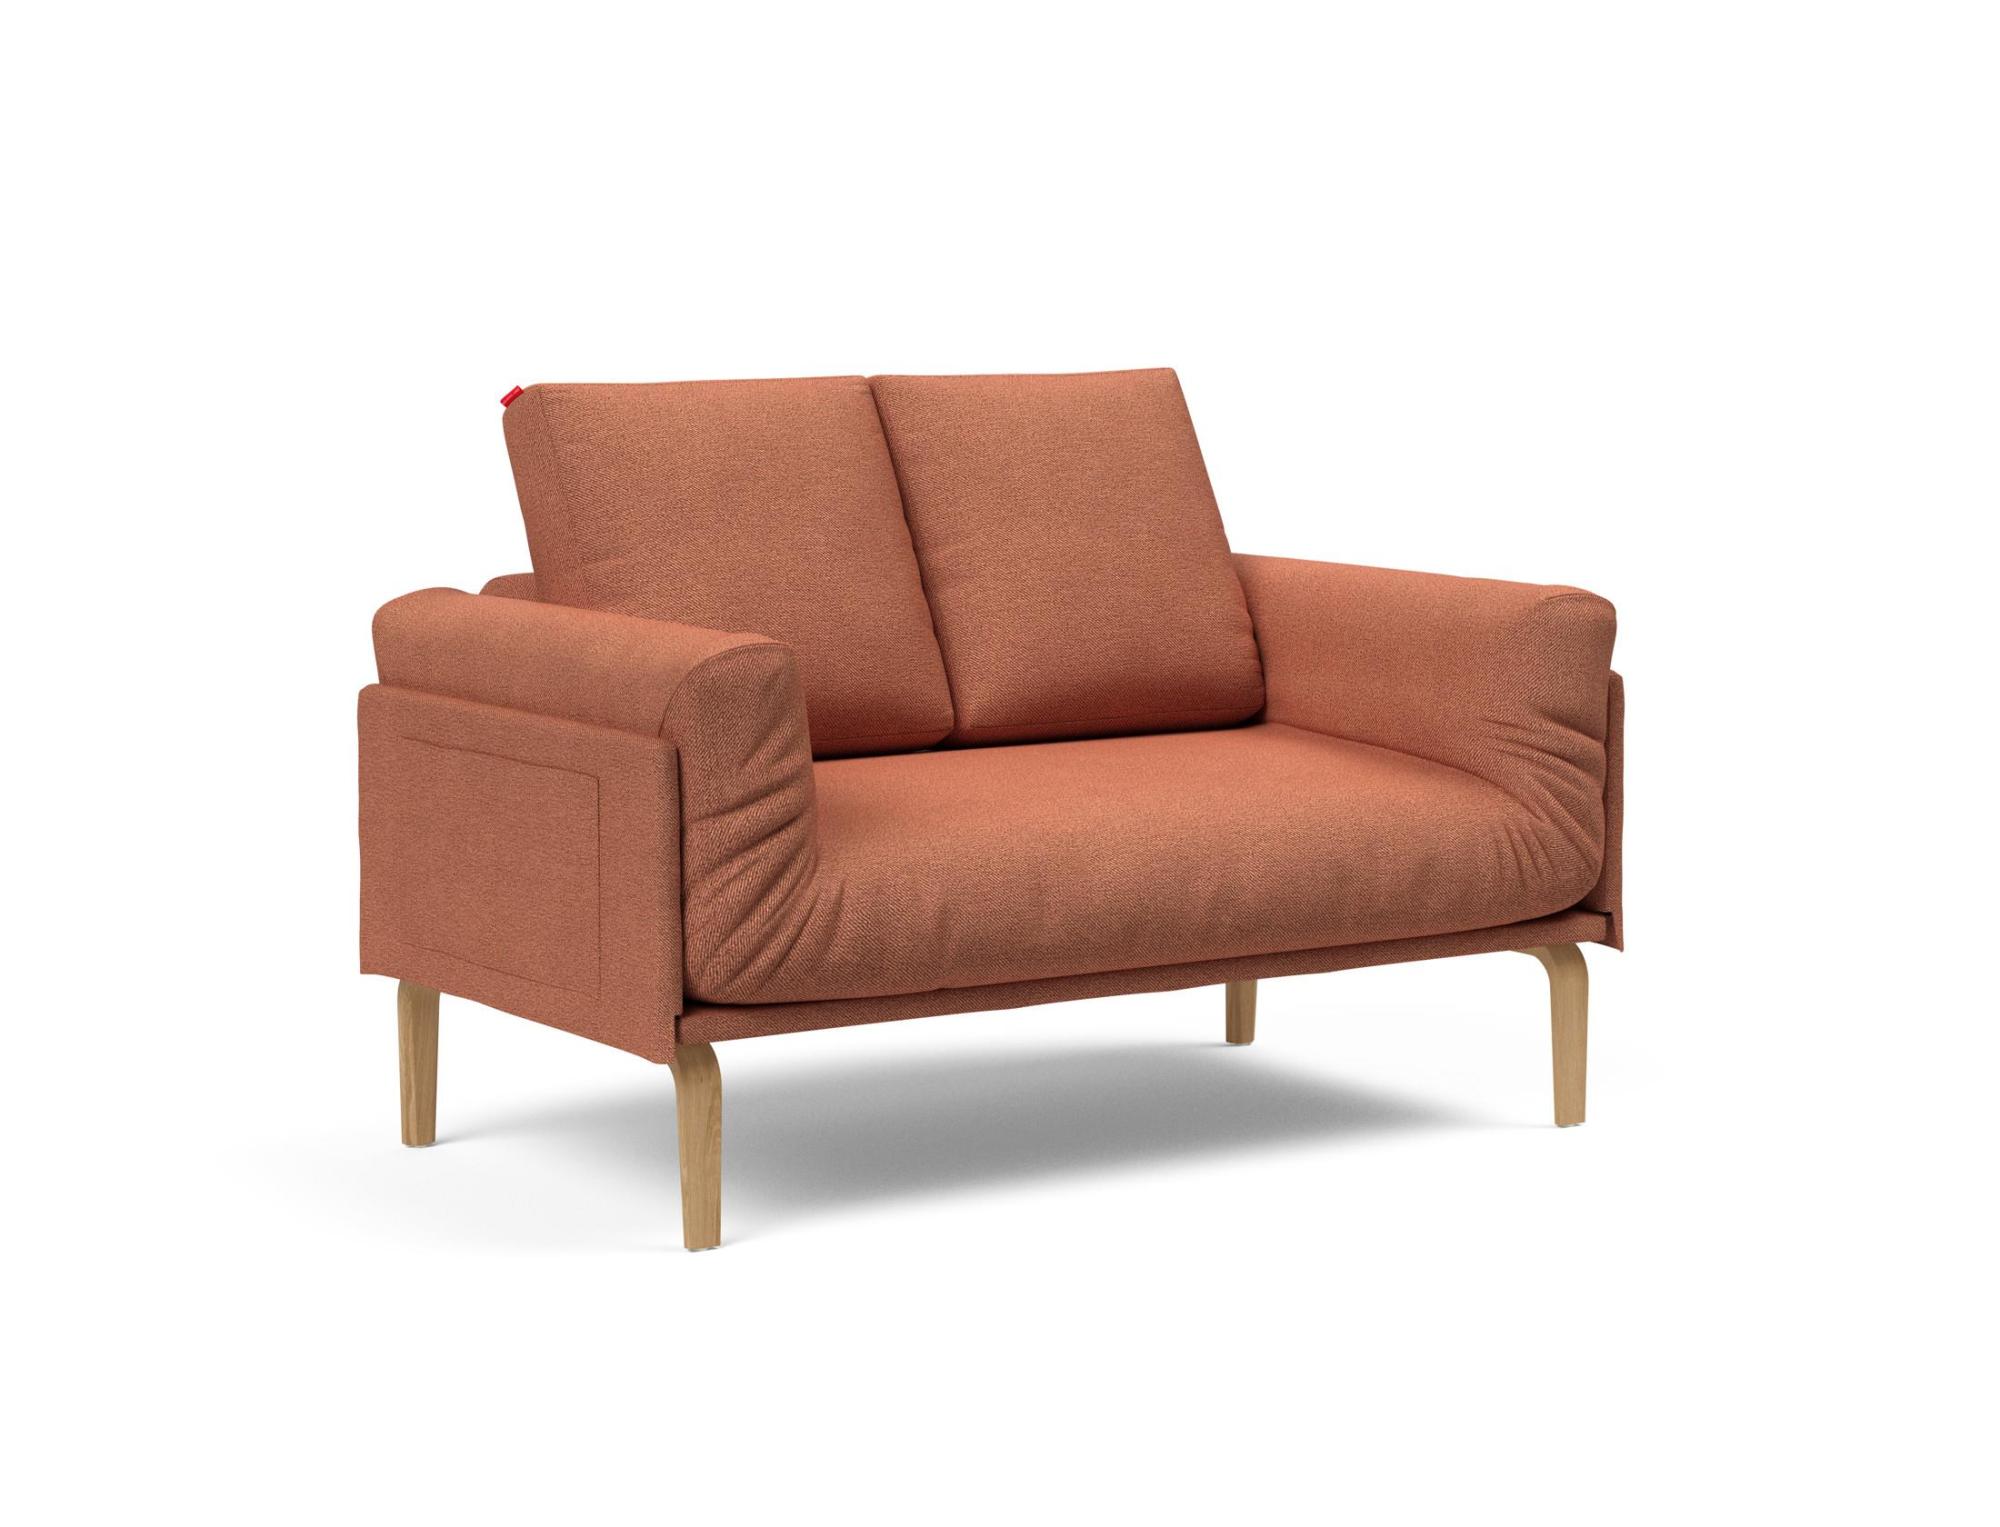 Liege/Daybed Liege/Daybed Rollo Innovation - Sofas